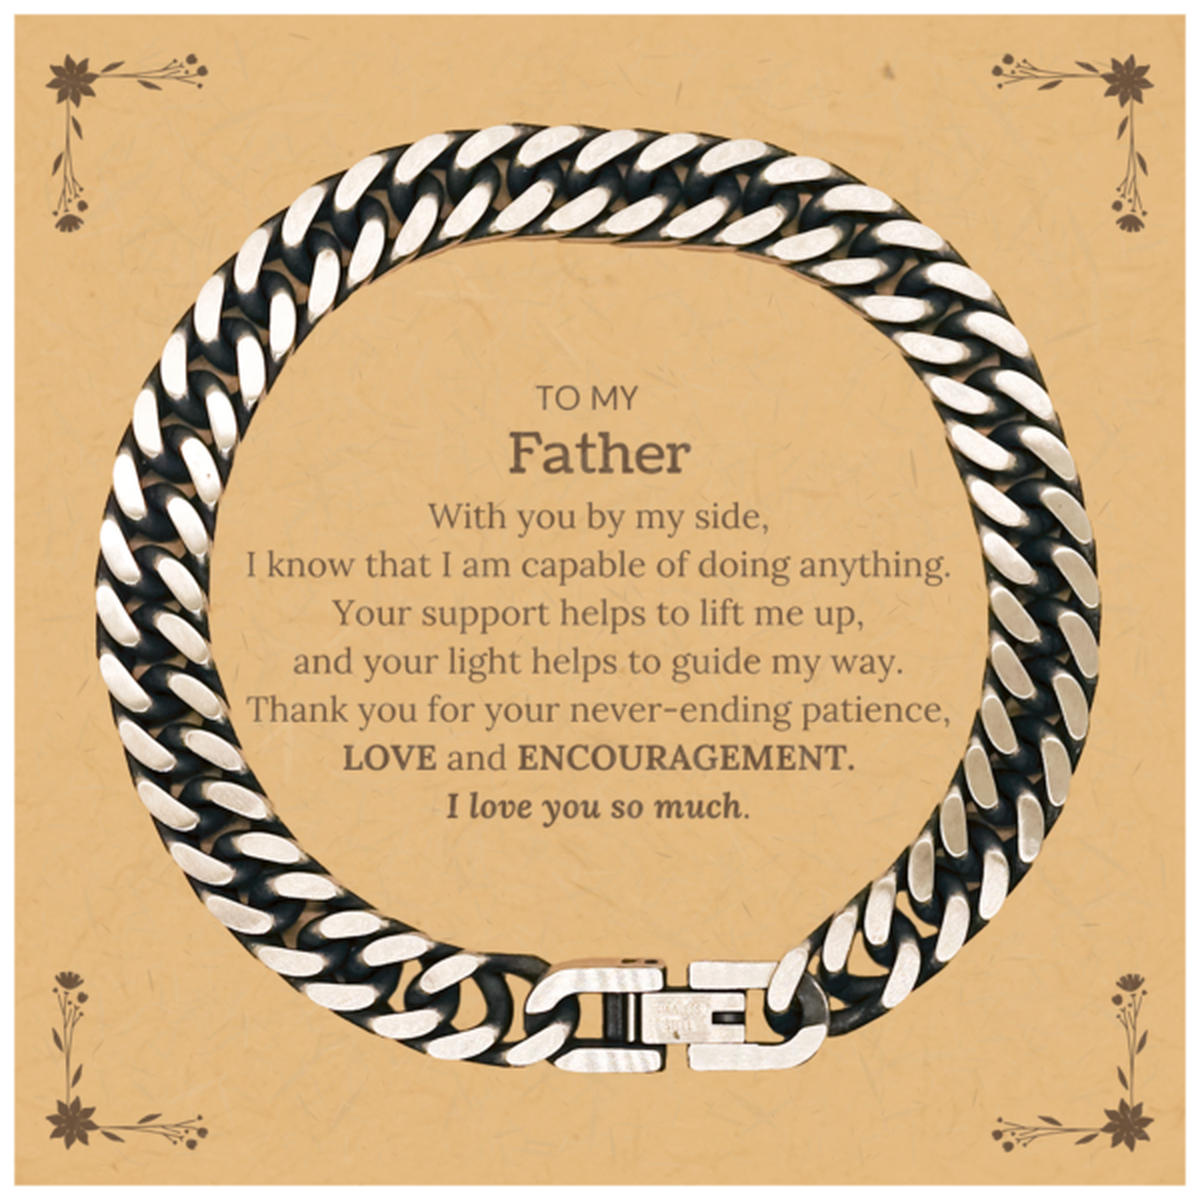 Appreciation Father Cuban Link Chain Bracelet Gifts, To My Father Birthday Christmas Wedding Keepsake Gifts for Father With you by my side, I know that I am capable of doing anything. I love you so much